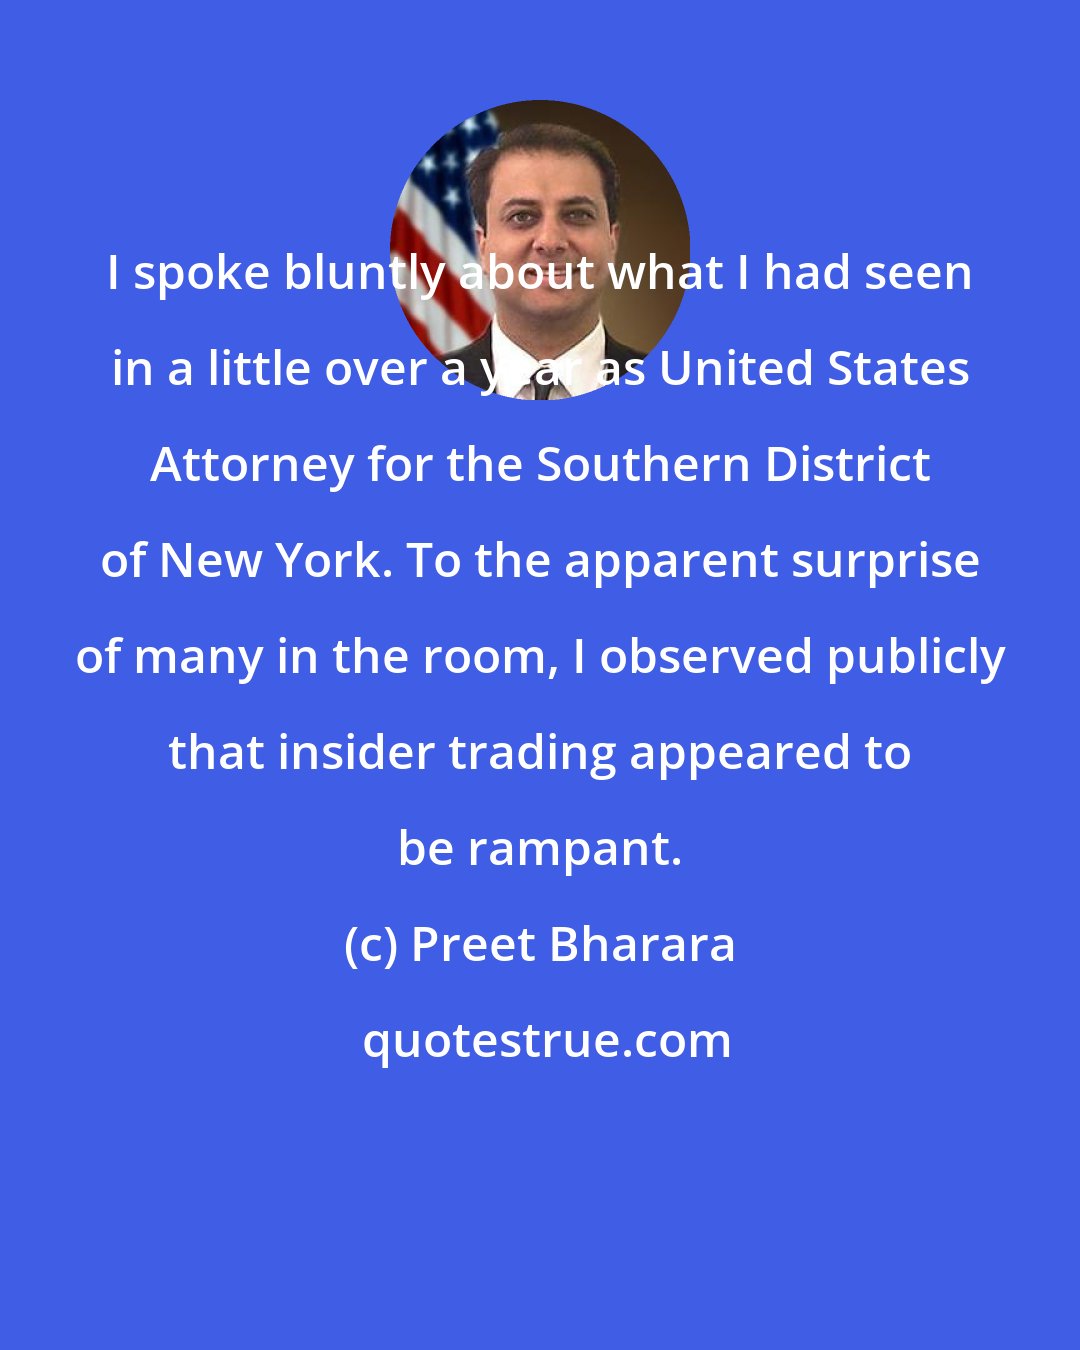 Preet Bharara: I spoke bluntly about what I had seen in a little over a year as United States Attorney for the Southern District of New York. To the apparent surprise of many in the room, I observed publicly that insider trading appeared to be rampant.